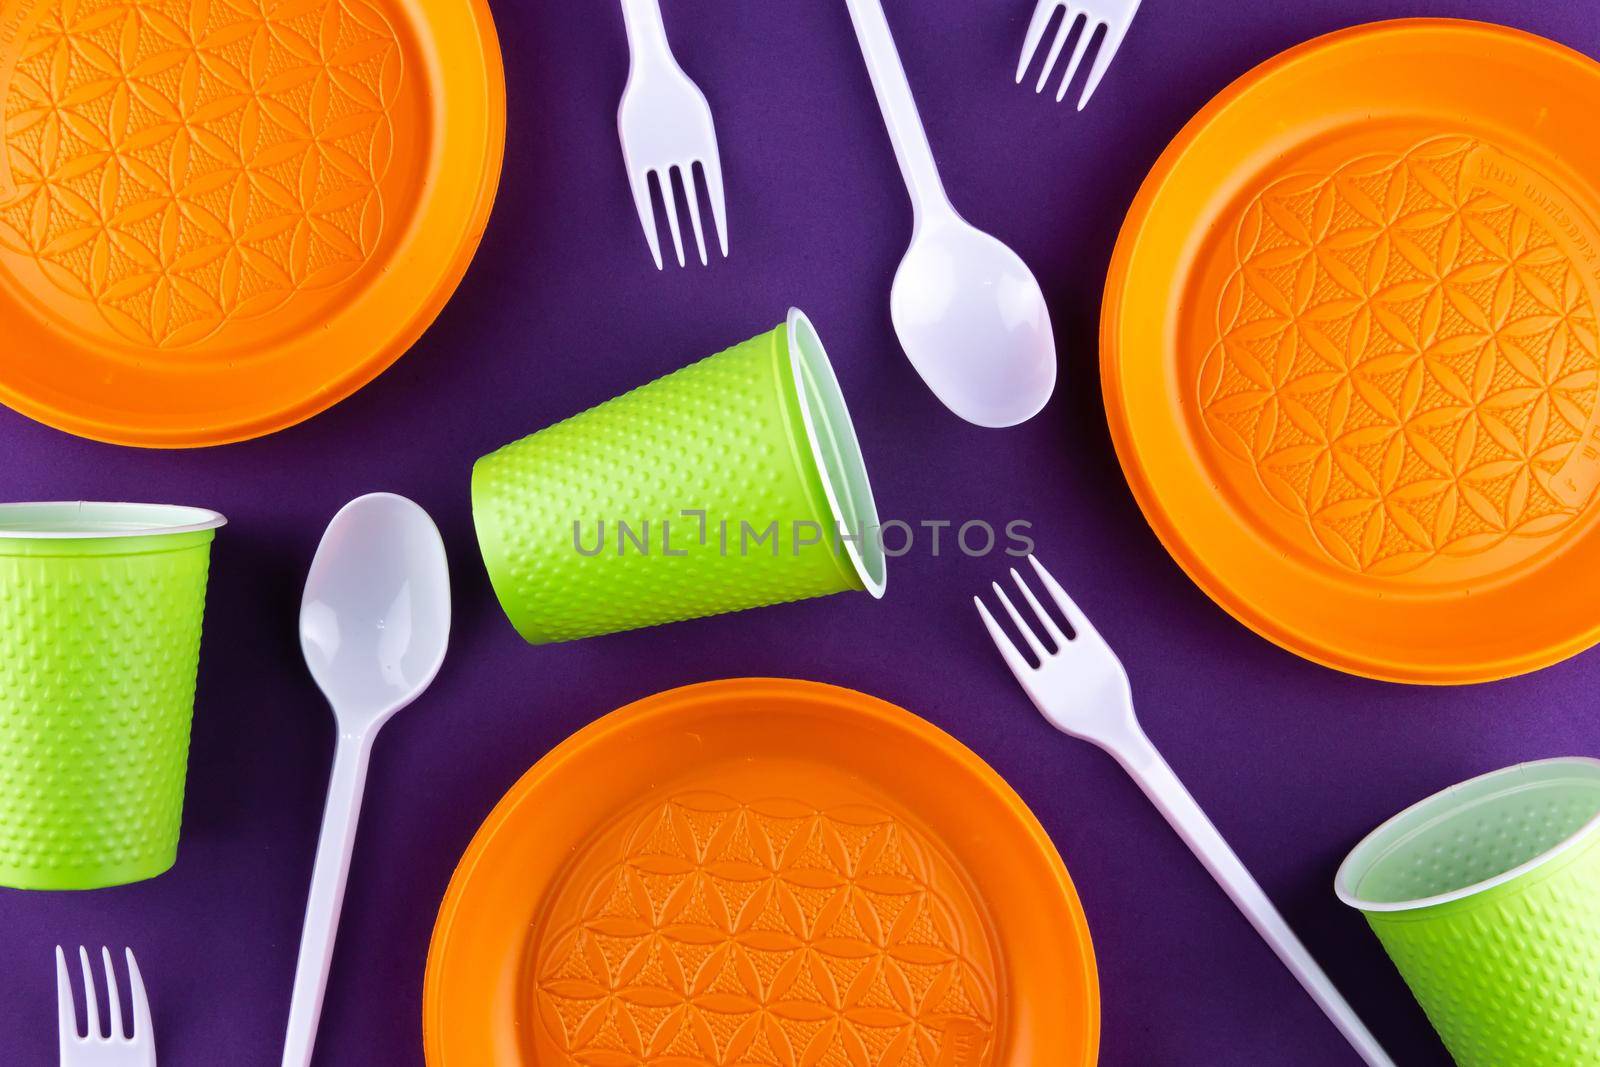 Plastic orange green waste collection on purple background. Concept of plastic pollution and ecology problem